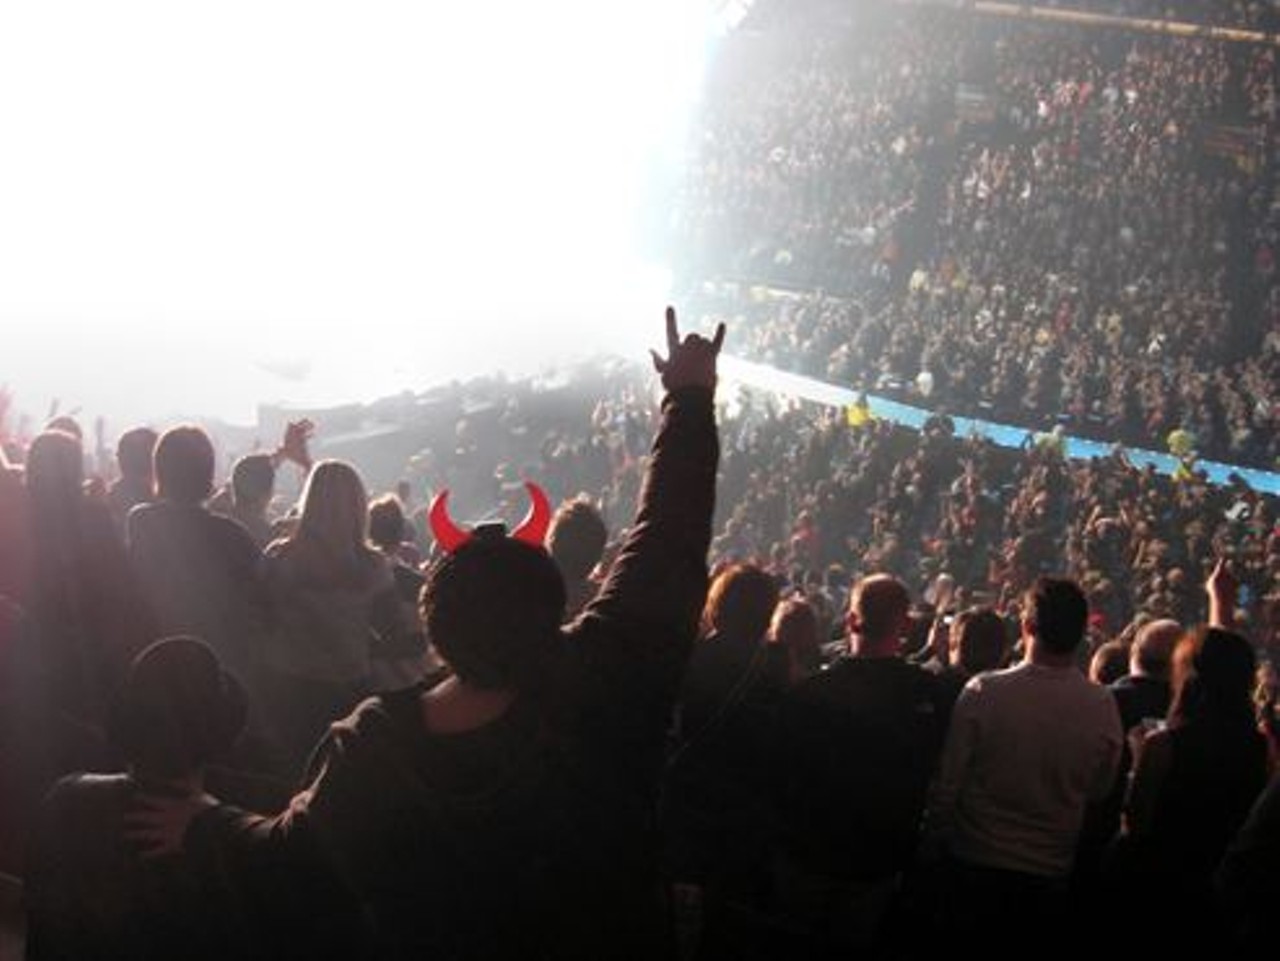 Read the AC/DC concert review in A to Z, the RFT's music blog.